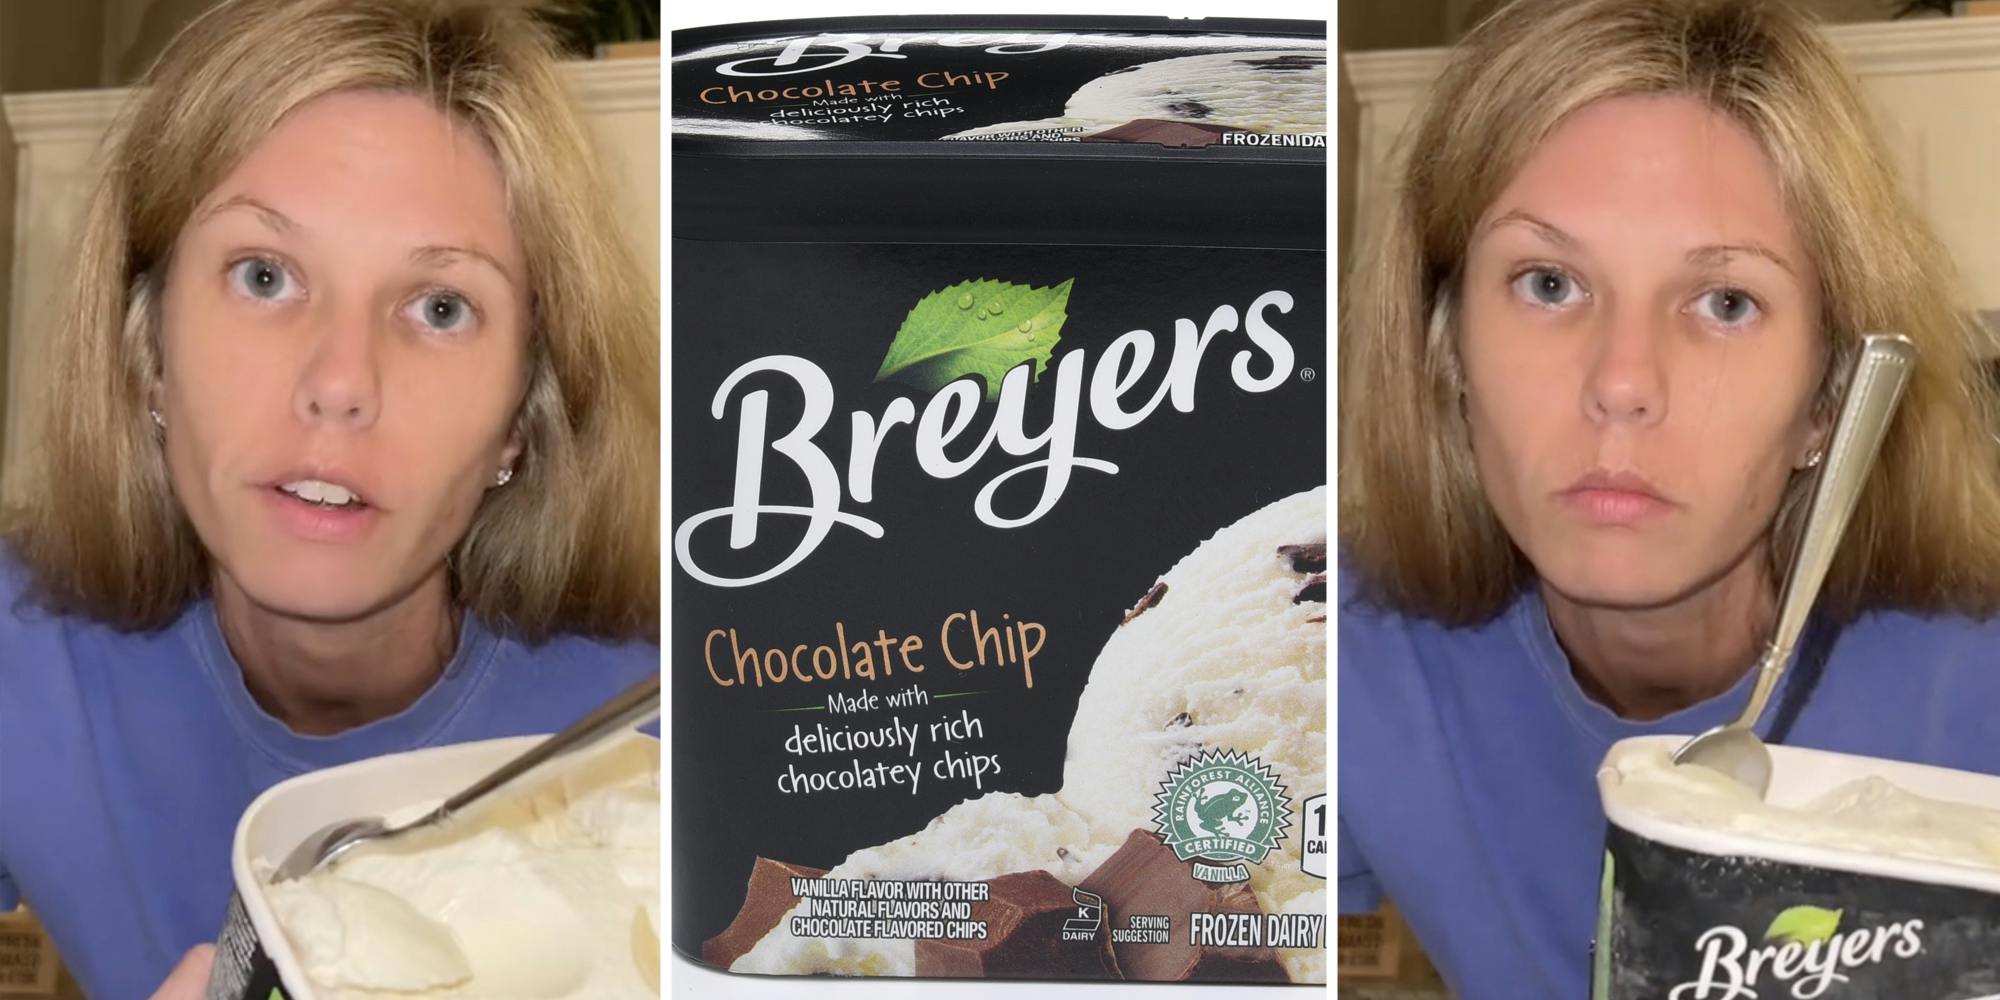 ‘False advertisement’: Woman calls out Breyer’s after buying Cookies and Cream ice cream and seeing what’s inside